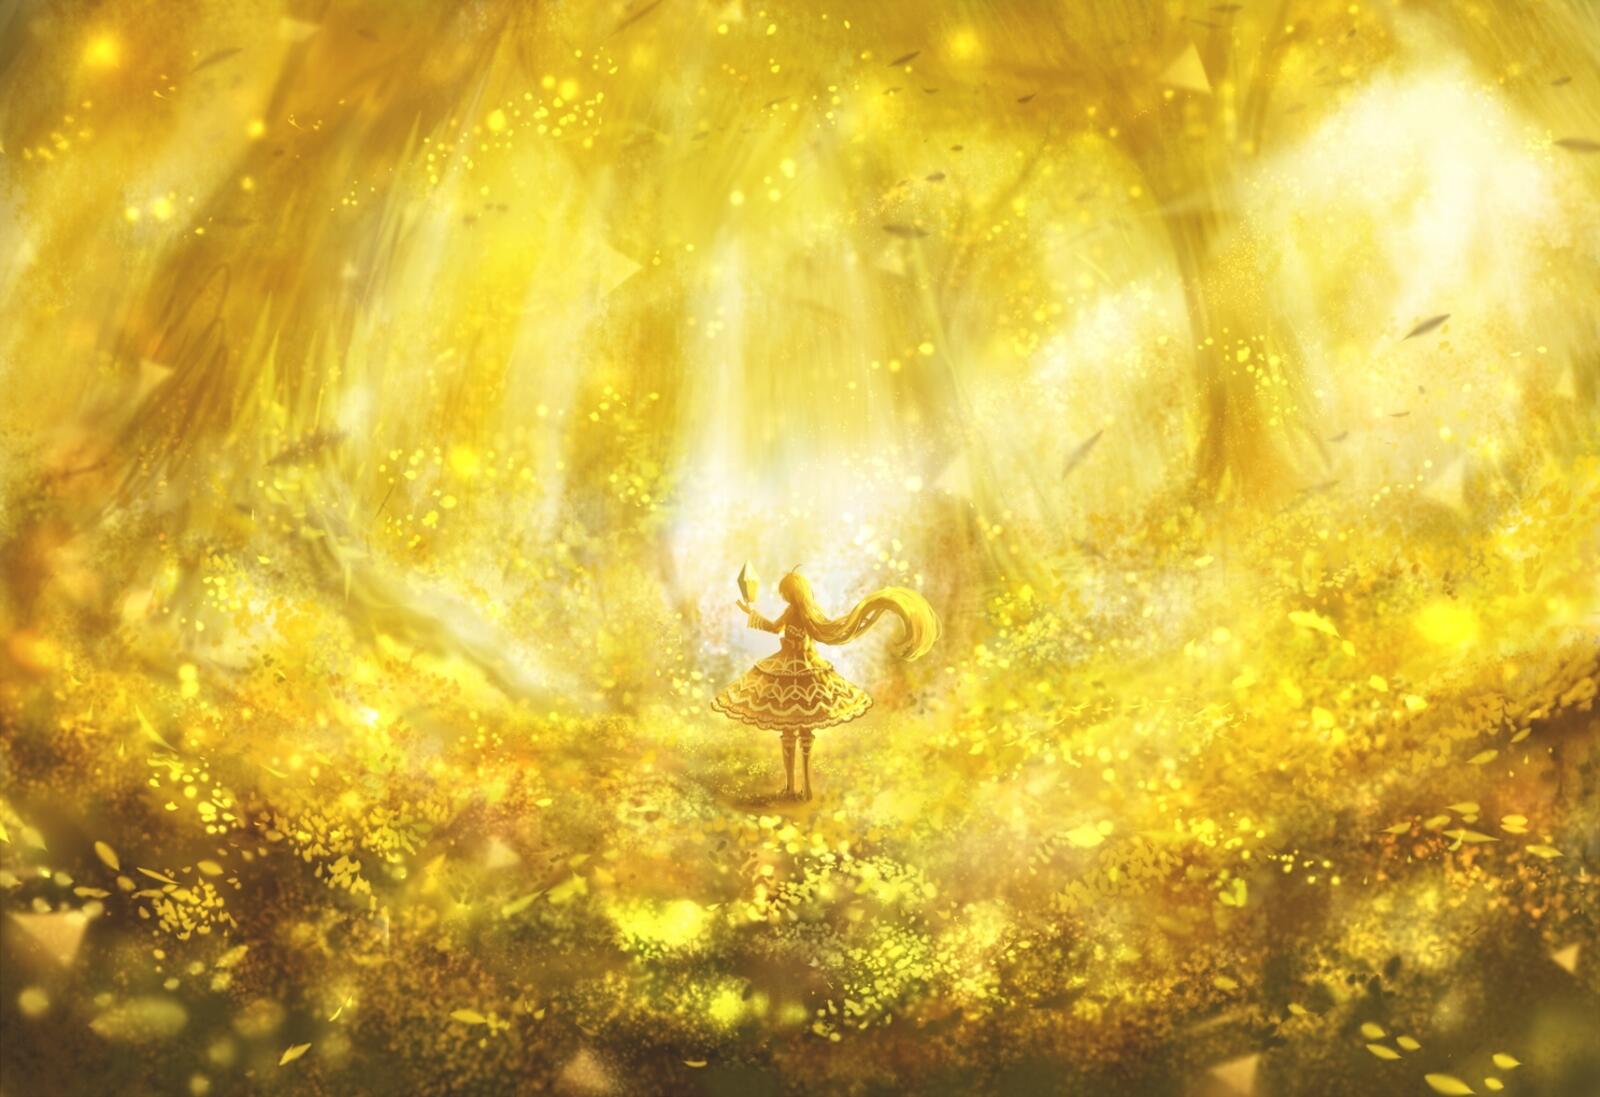 Wallpapers anime girl forest magic on the desktop